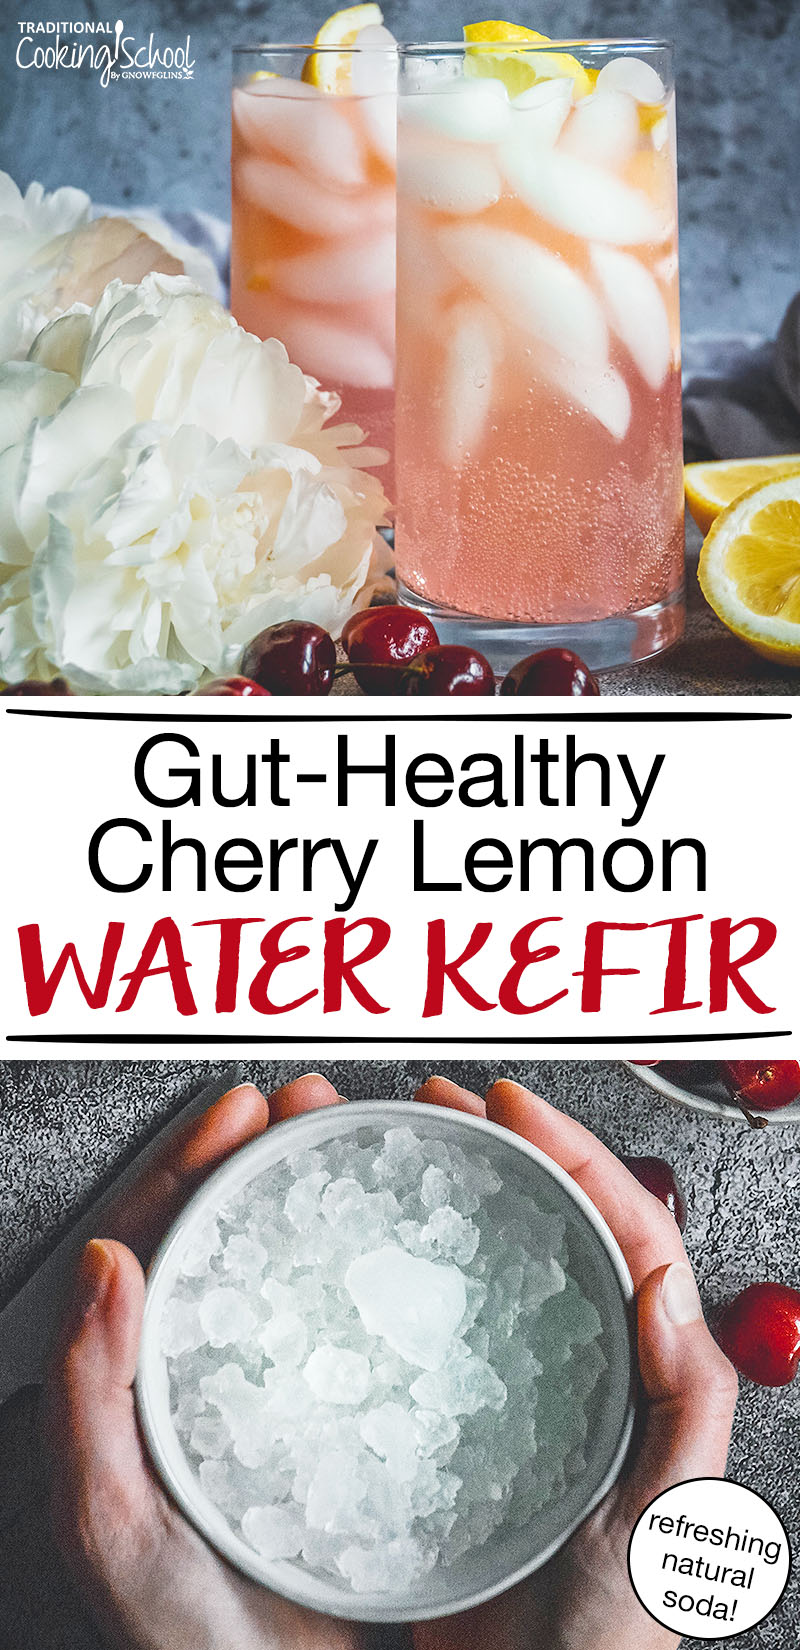 photo collage of a bowl of water kefir grains and two clear drinking glasses full of a ice cubes and a fizzy light pink liquid, topped with lemon slices, and surrounded by white flowers, cherries, and lemon halves, with text overlay: "Gut-Healthy Cherry Lemon Water Kefir (refreshing natural soda!)"